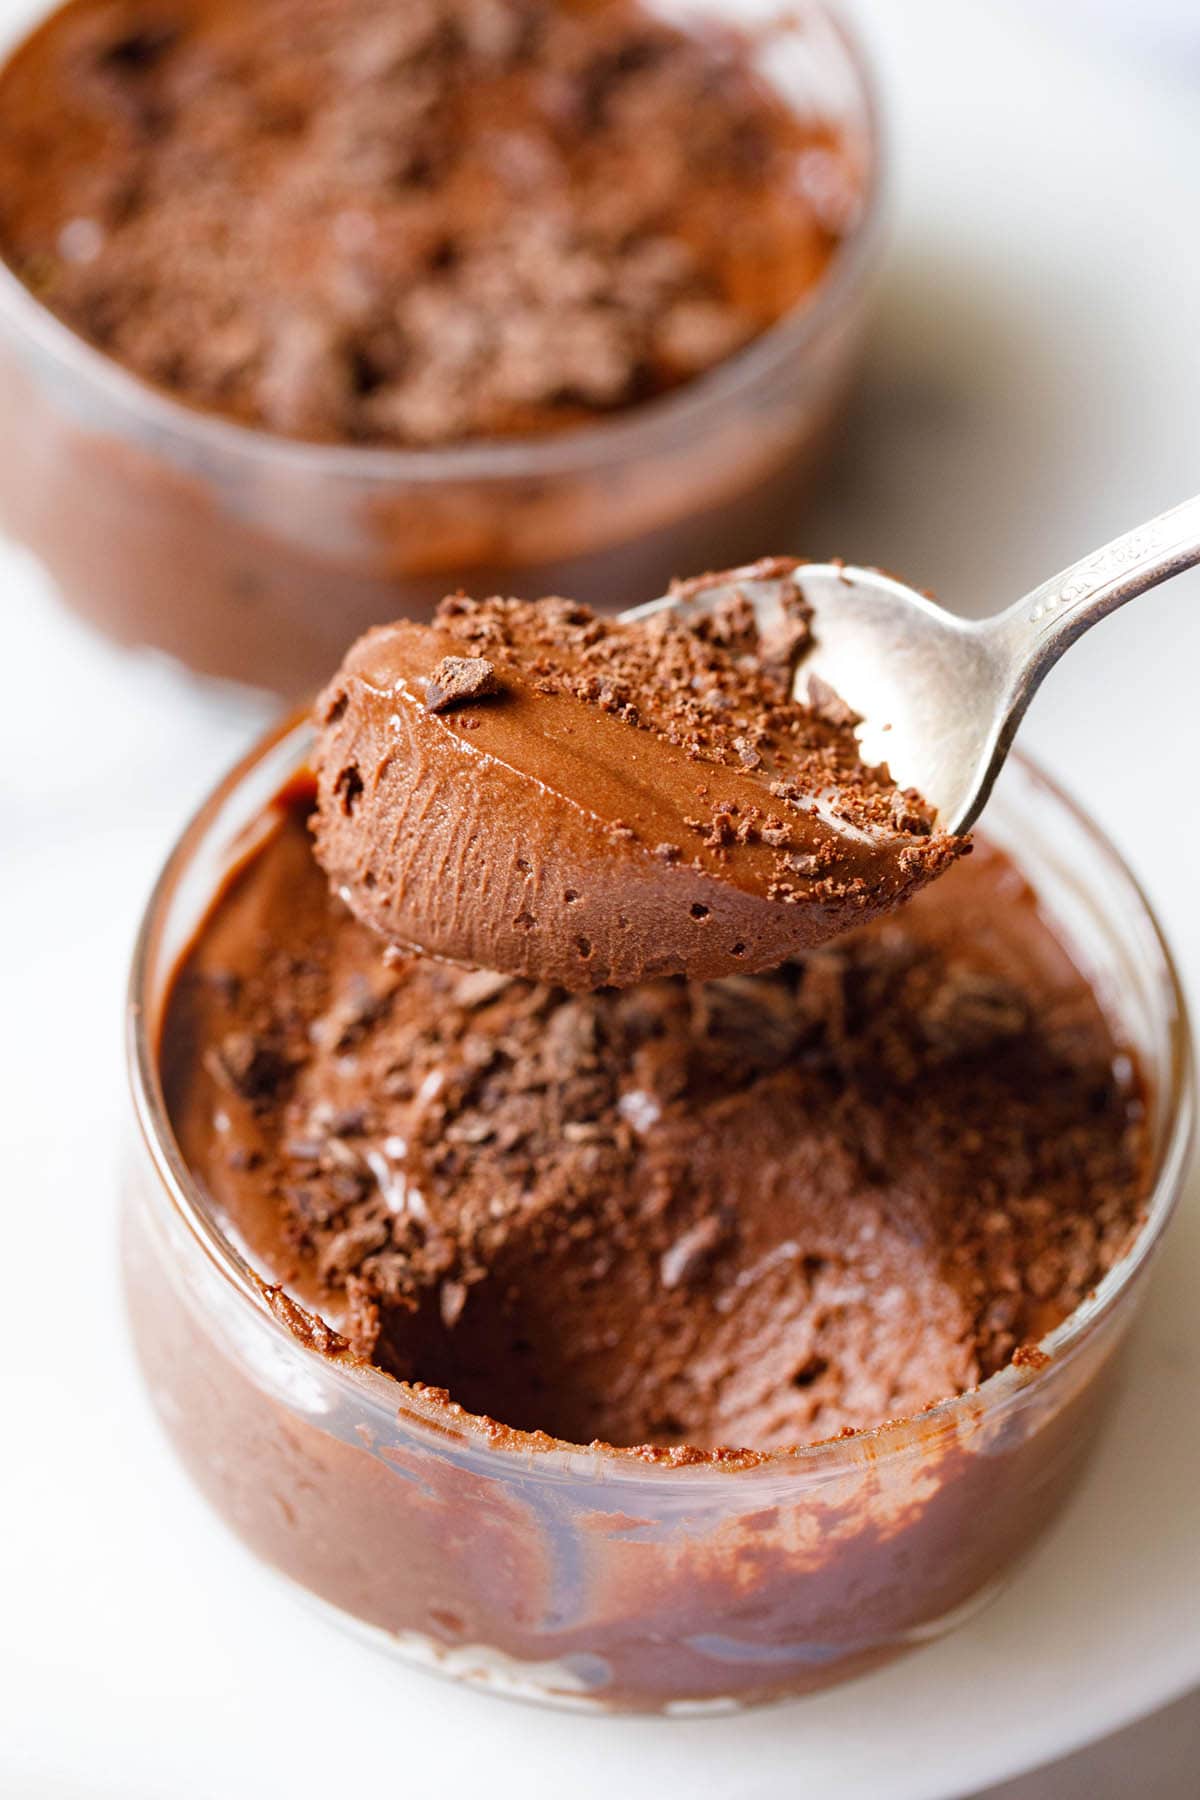 closeup shot of eggless chocolate mousse scooped in a silver spoon showing its light fluffy texture held above a bowl filled with the mousse